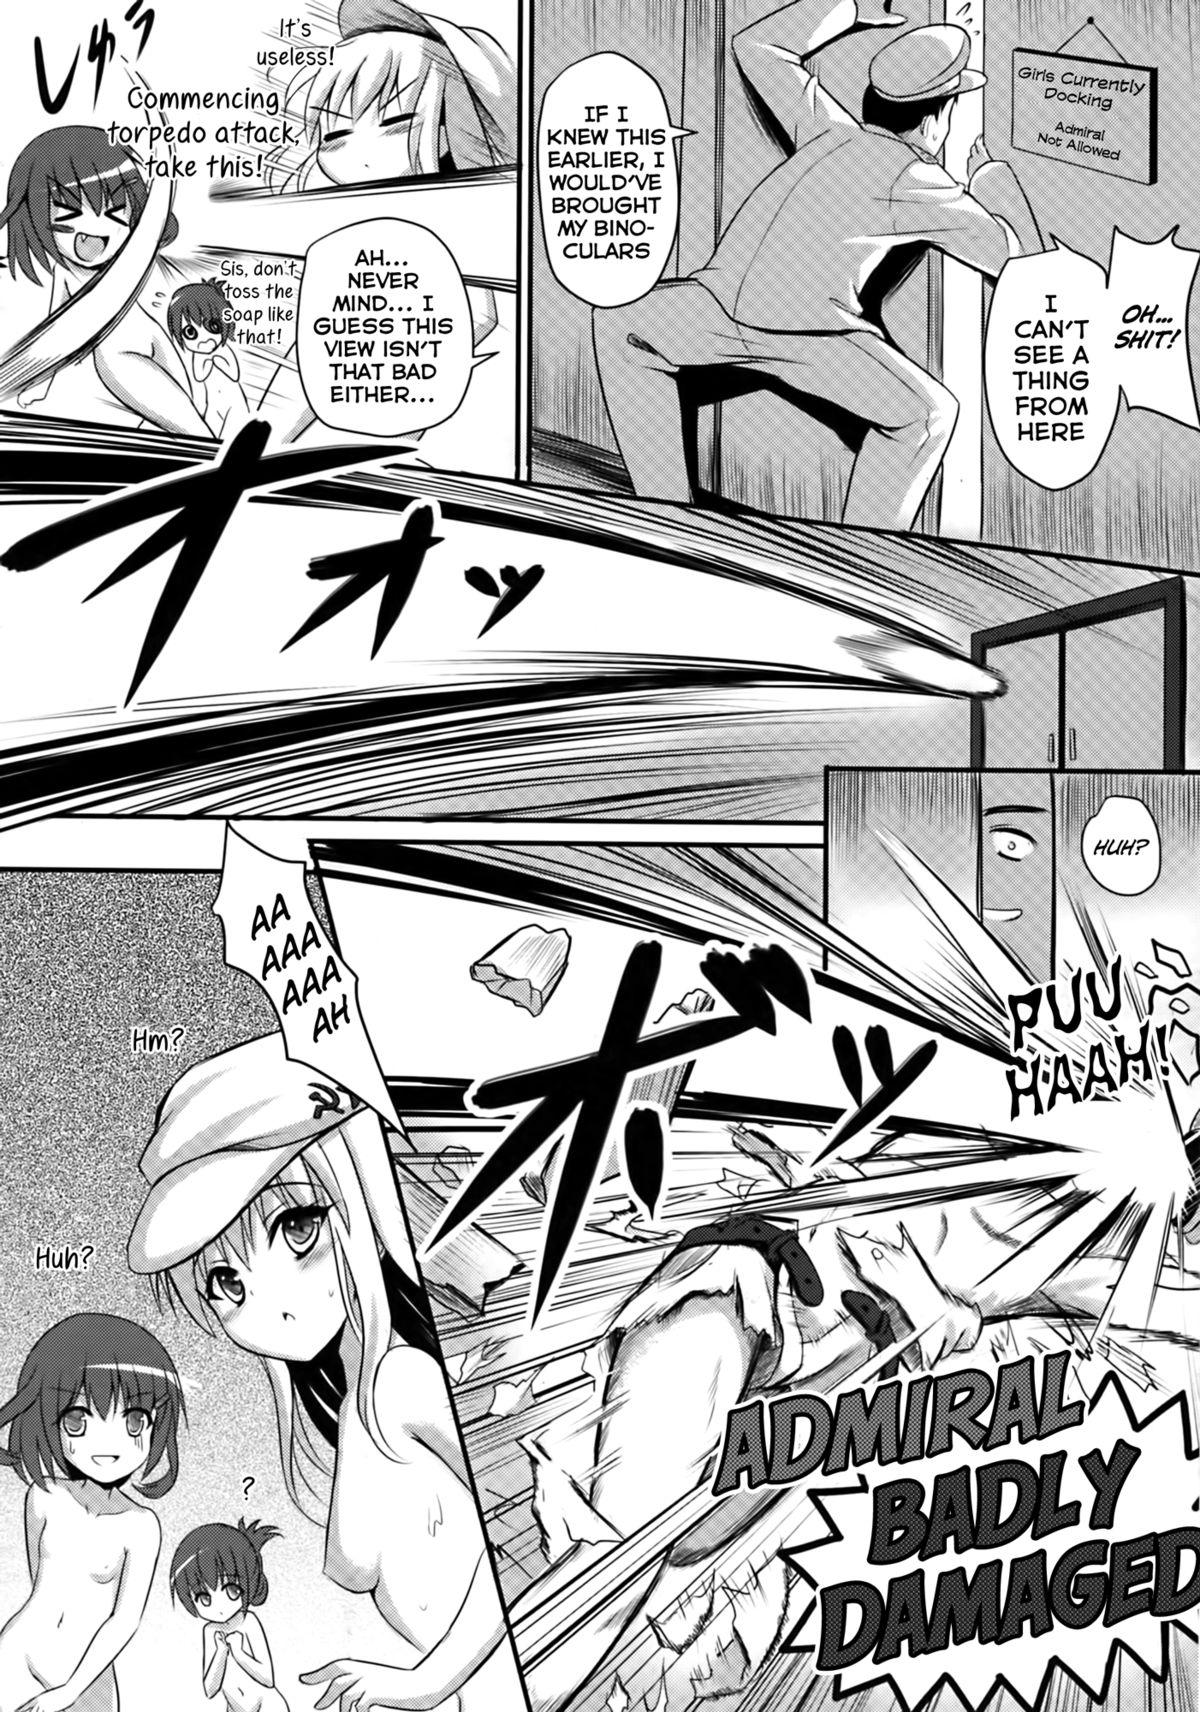 Gayhardcore Sixth destroyer bathhouse - Kantai collection Ametuer Porn - Page 5